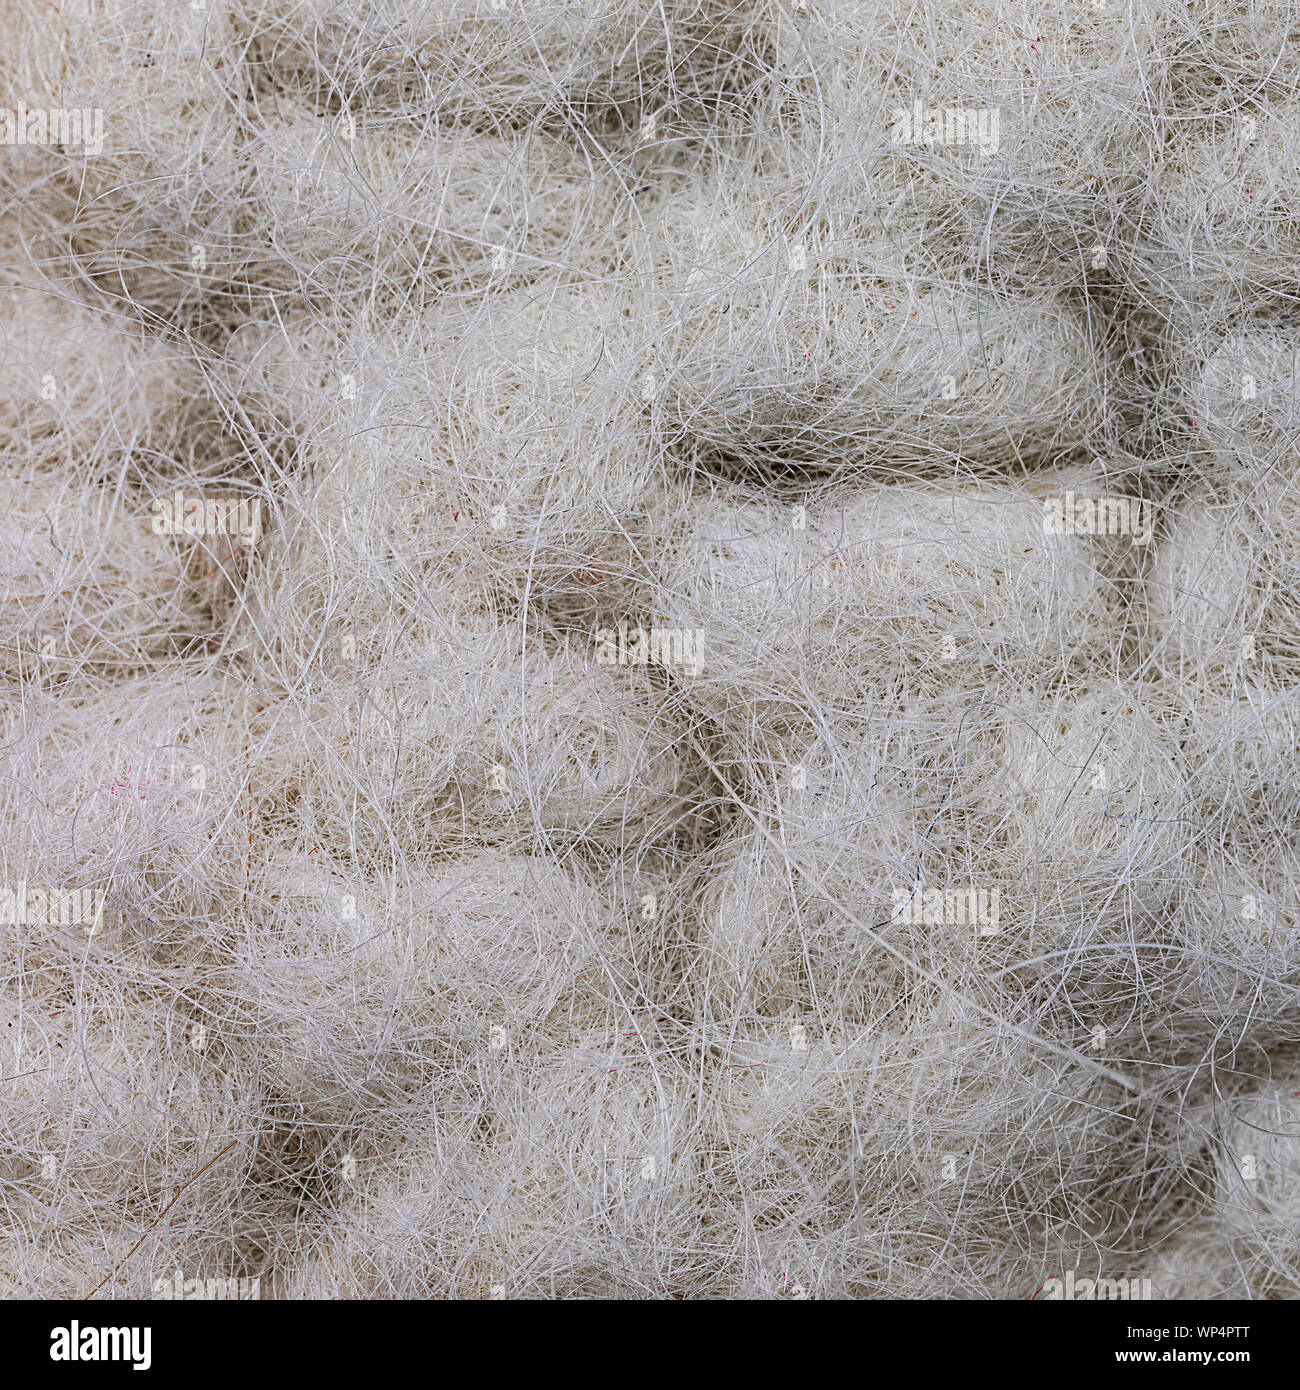 extreme closeup of felted knitted wool Stock Photo